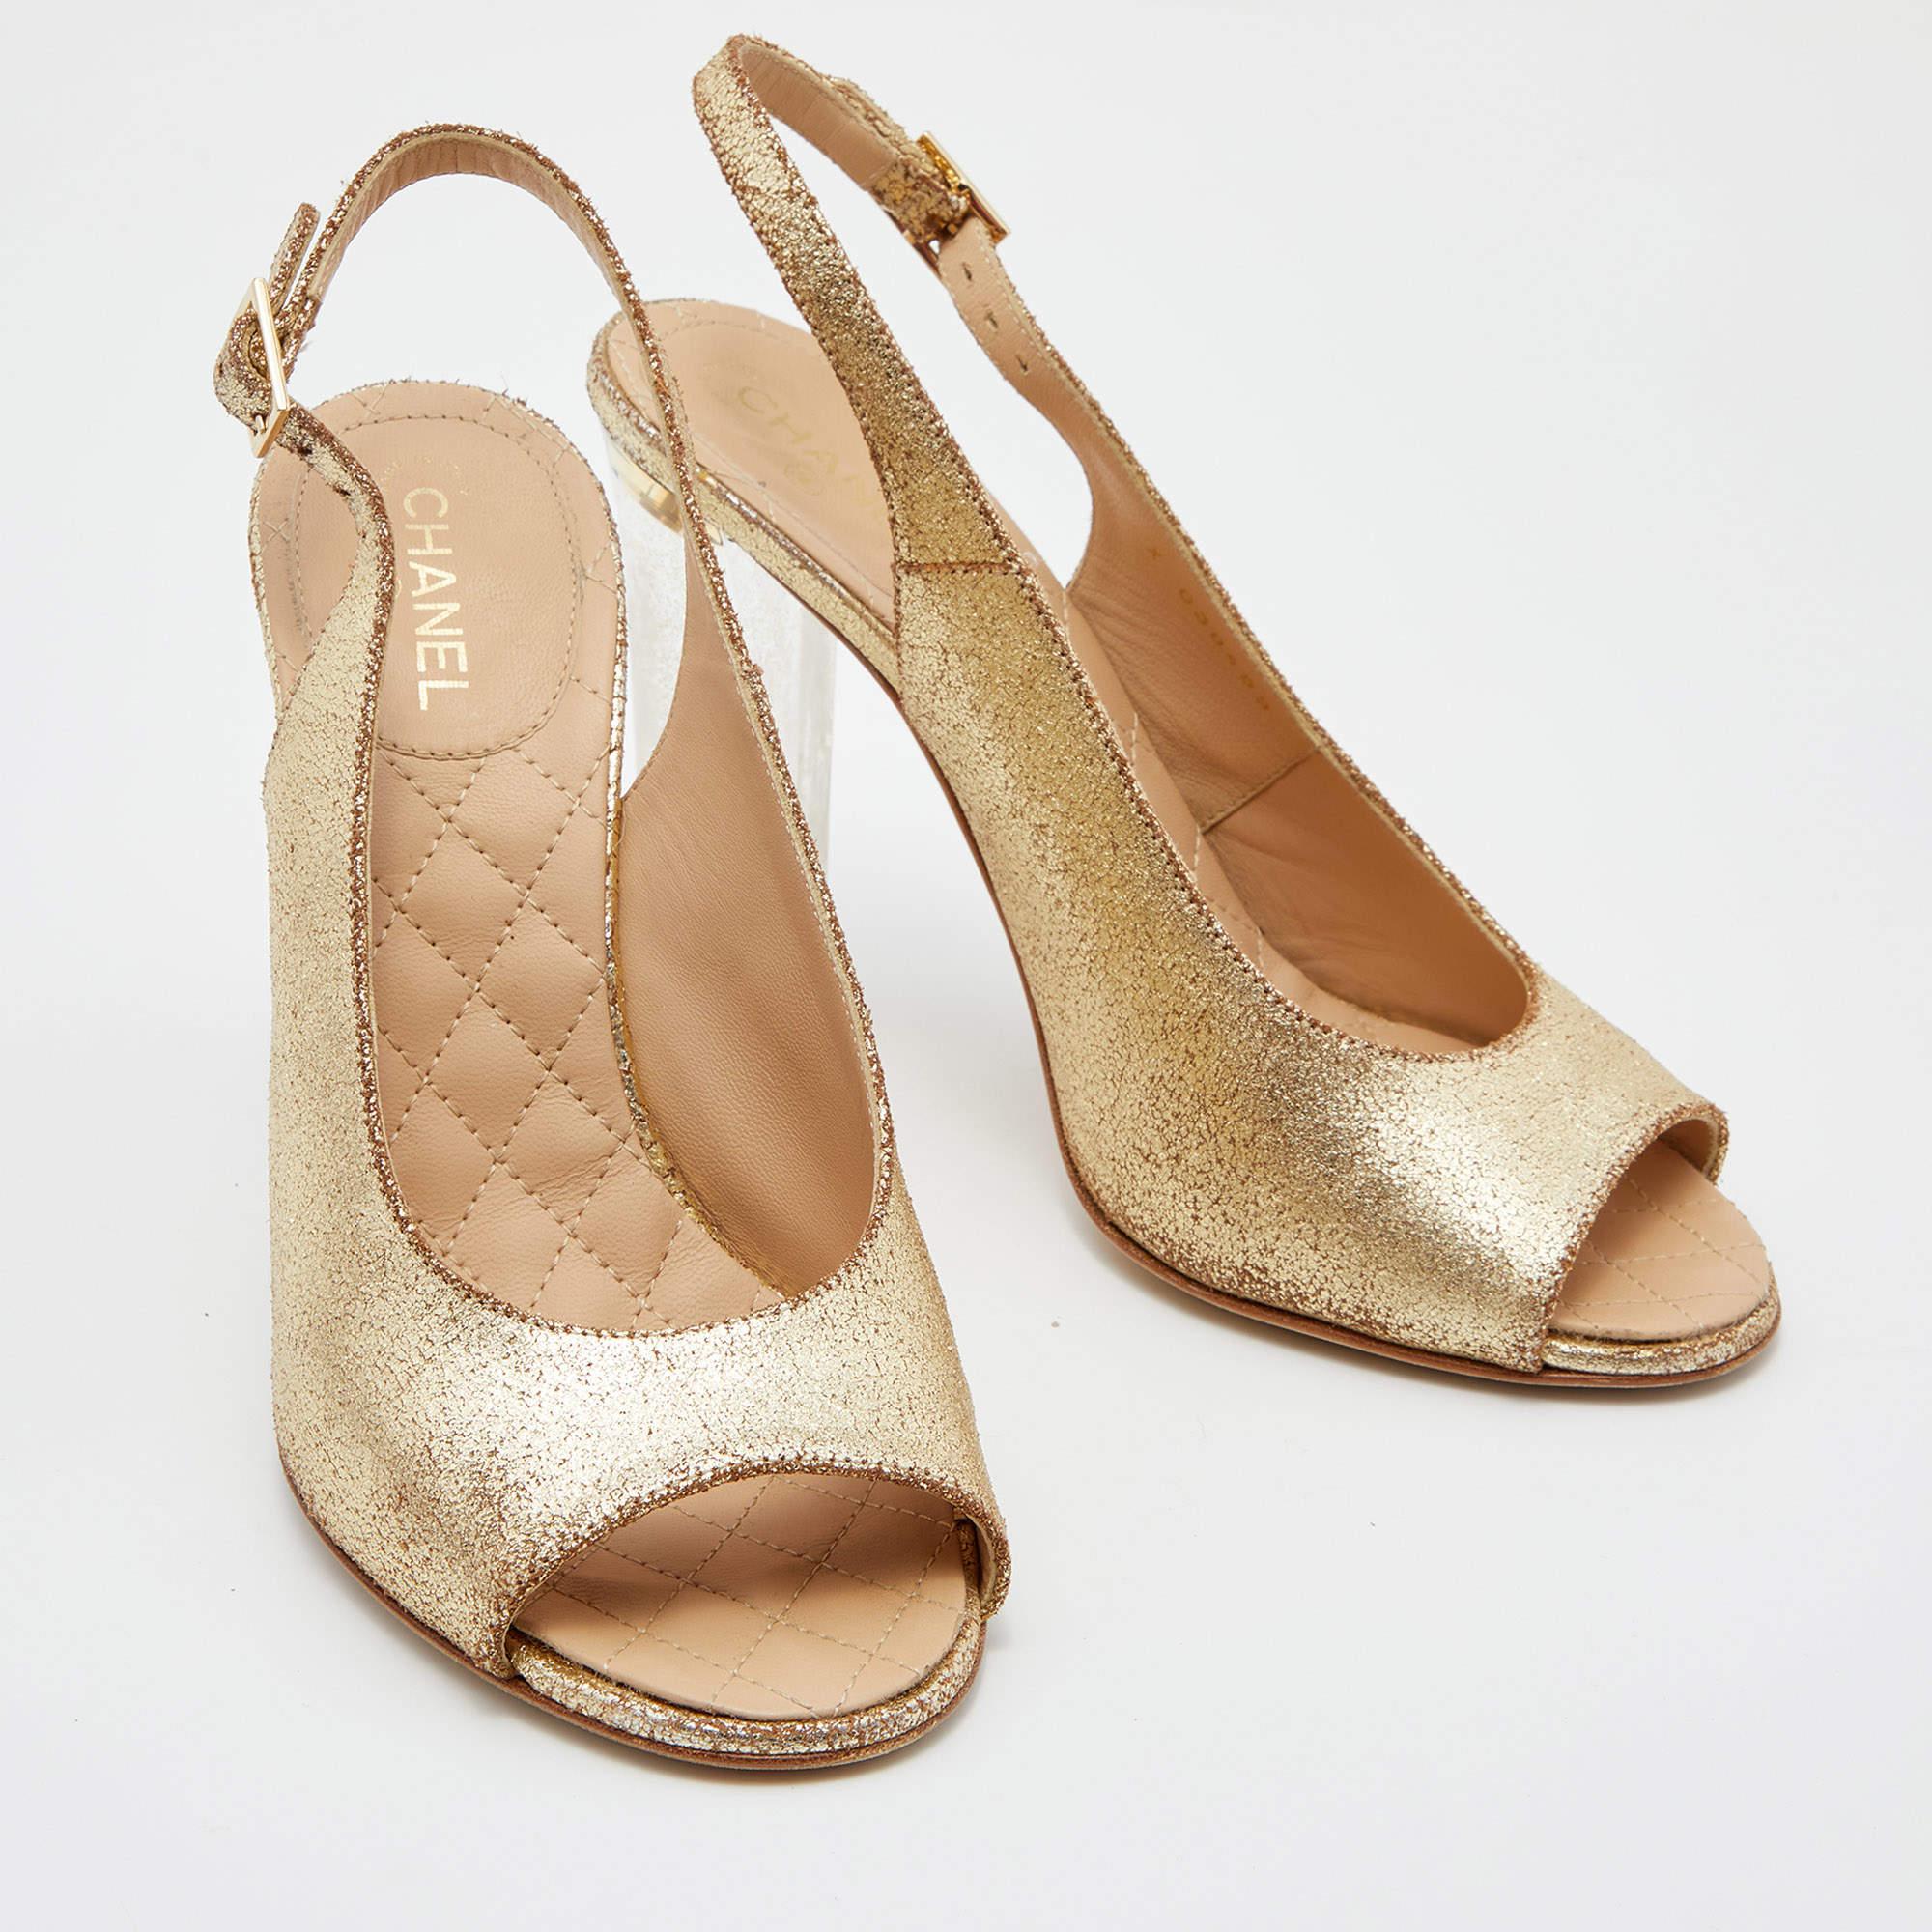 Chanel Gold Crackled Leather CC Open Toe Slingback Pumps Size 38.5 1